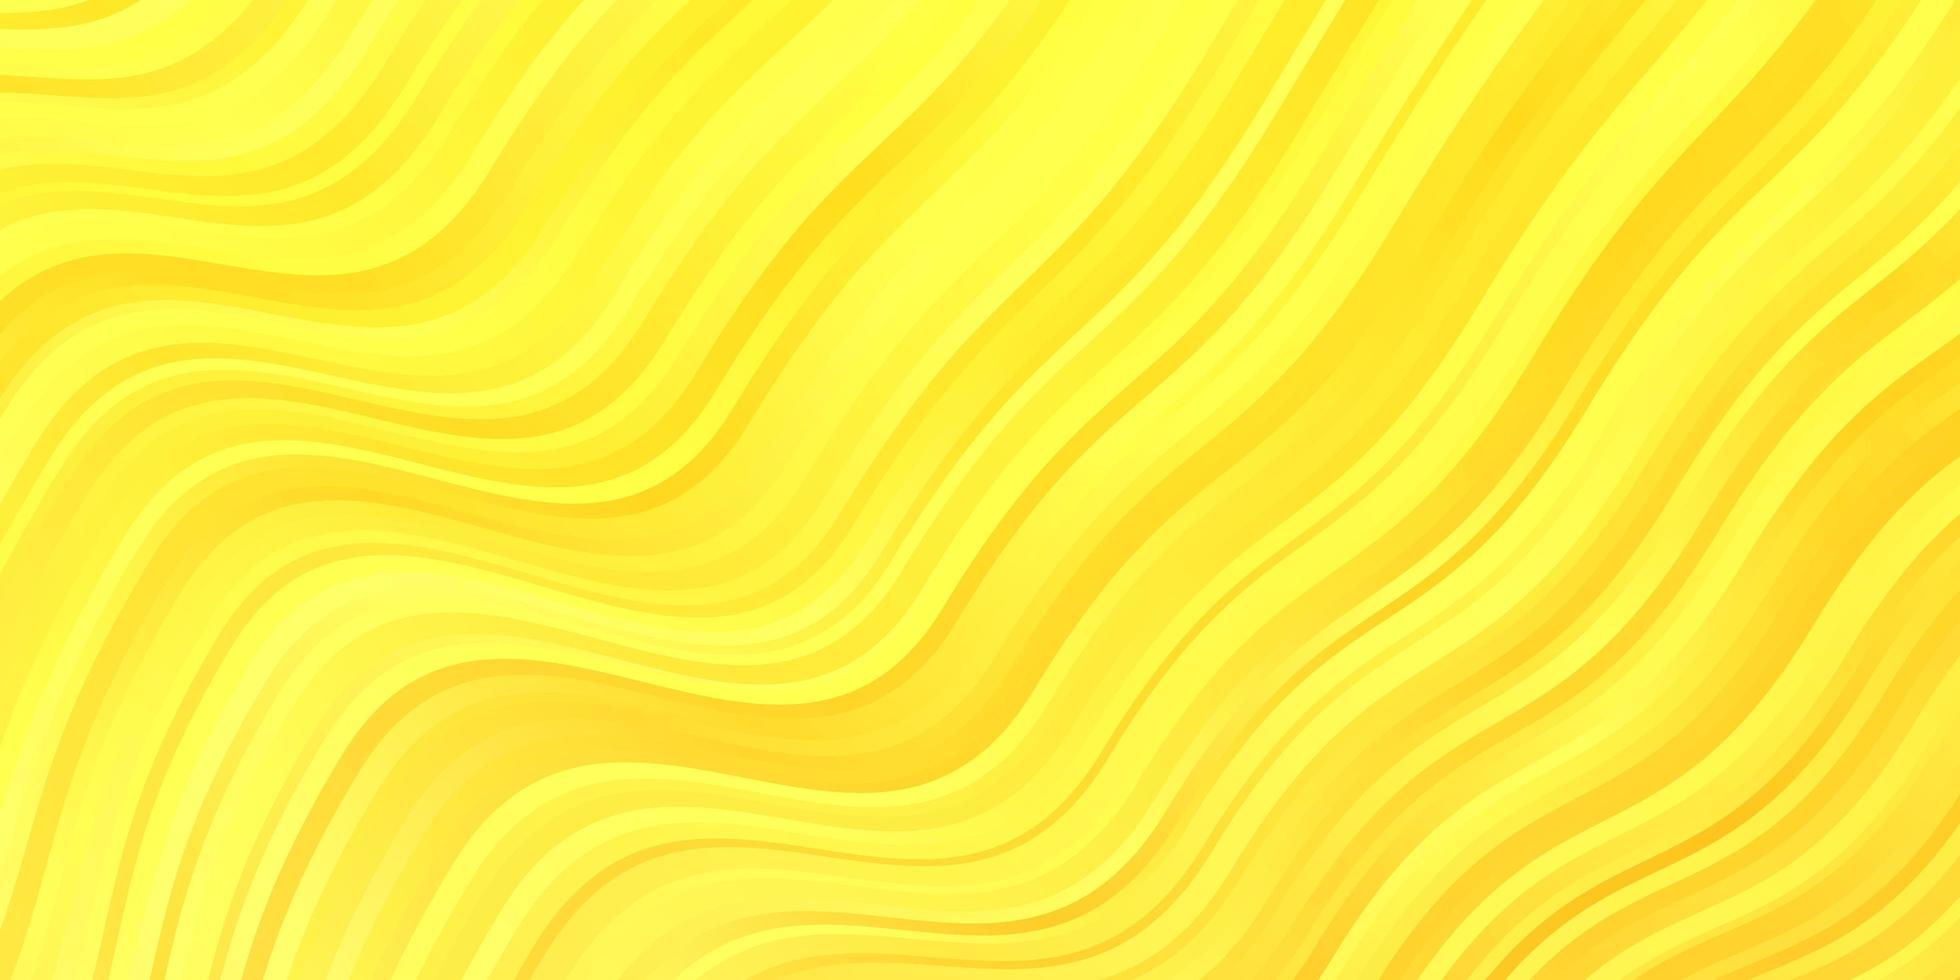 Light Yellow vector template with lines.